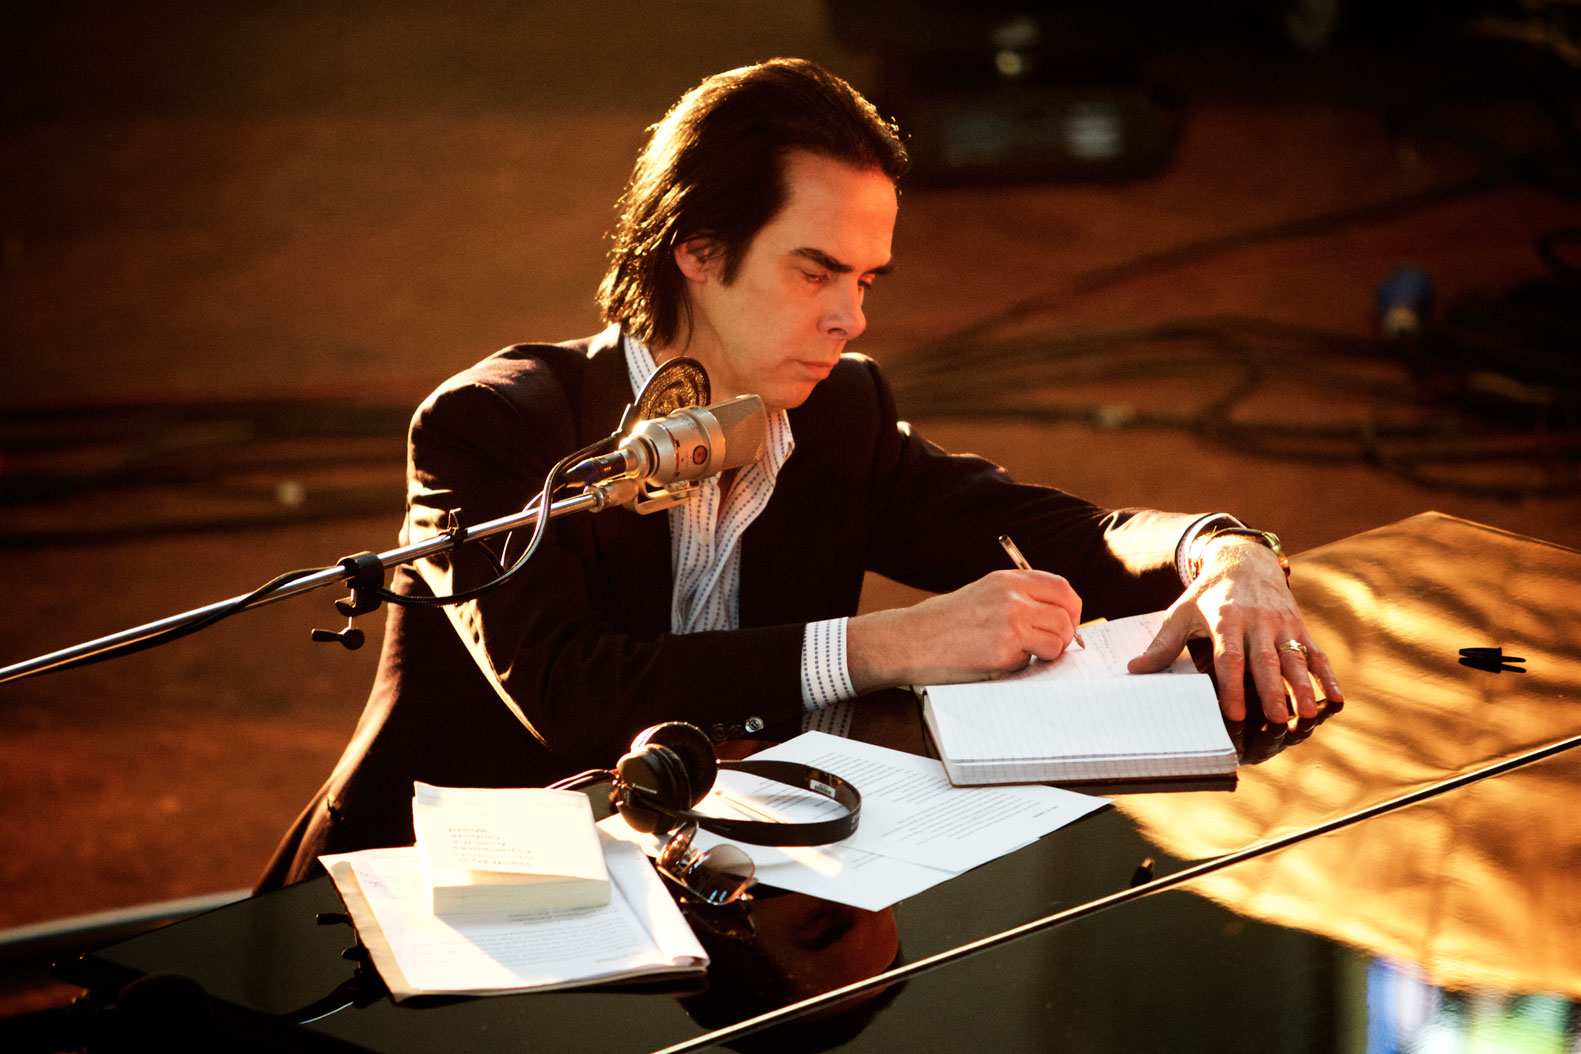 Nick Cave & The Bad Seeds on track for second top album